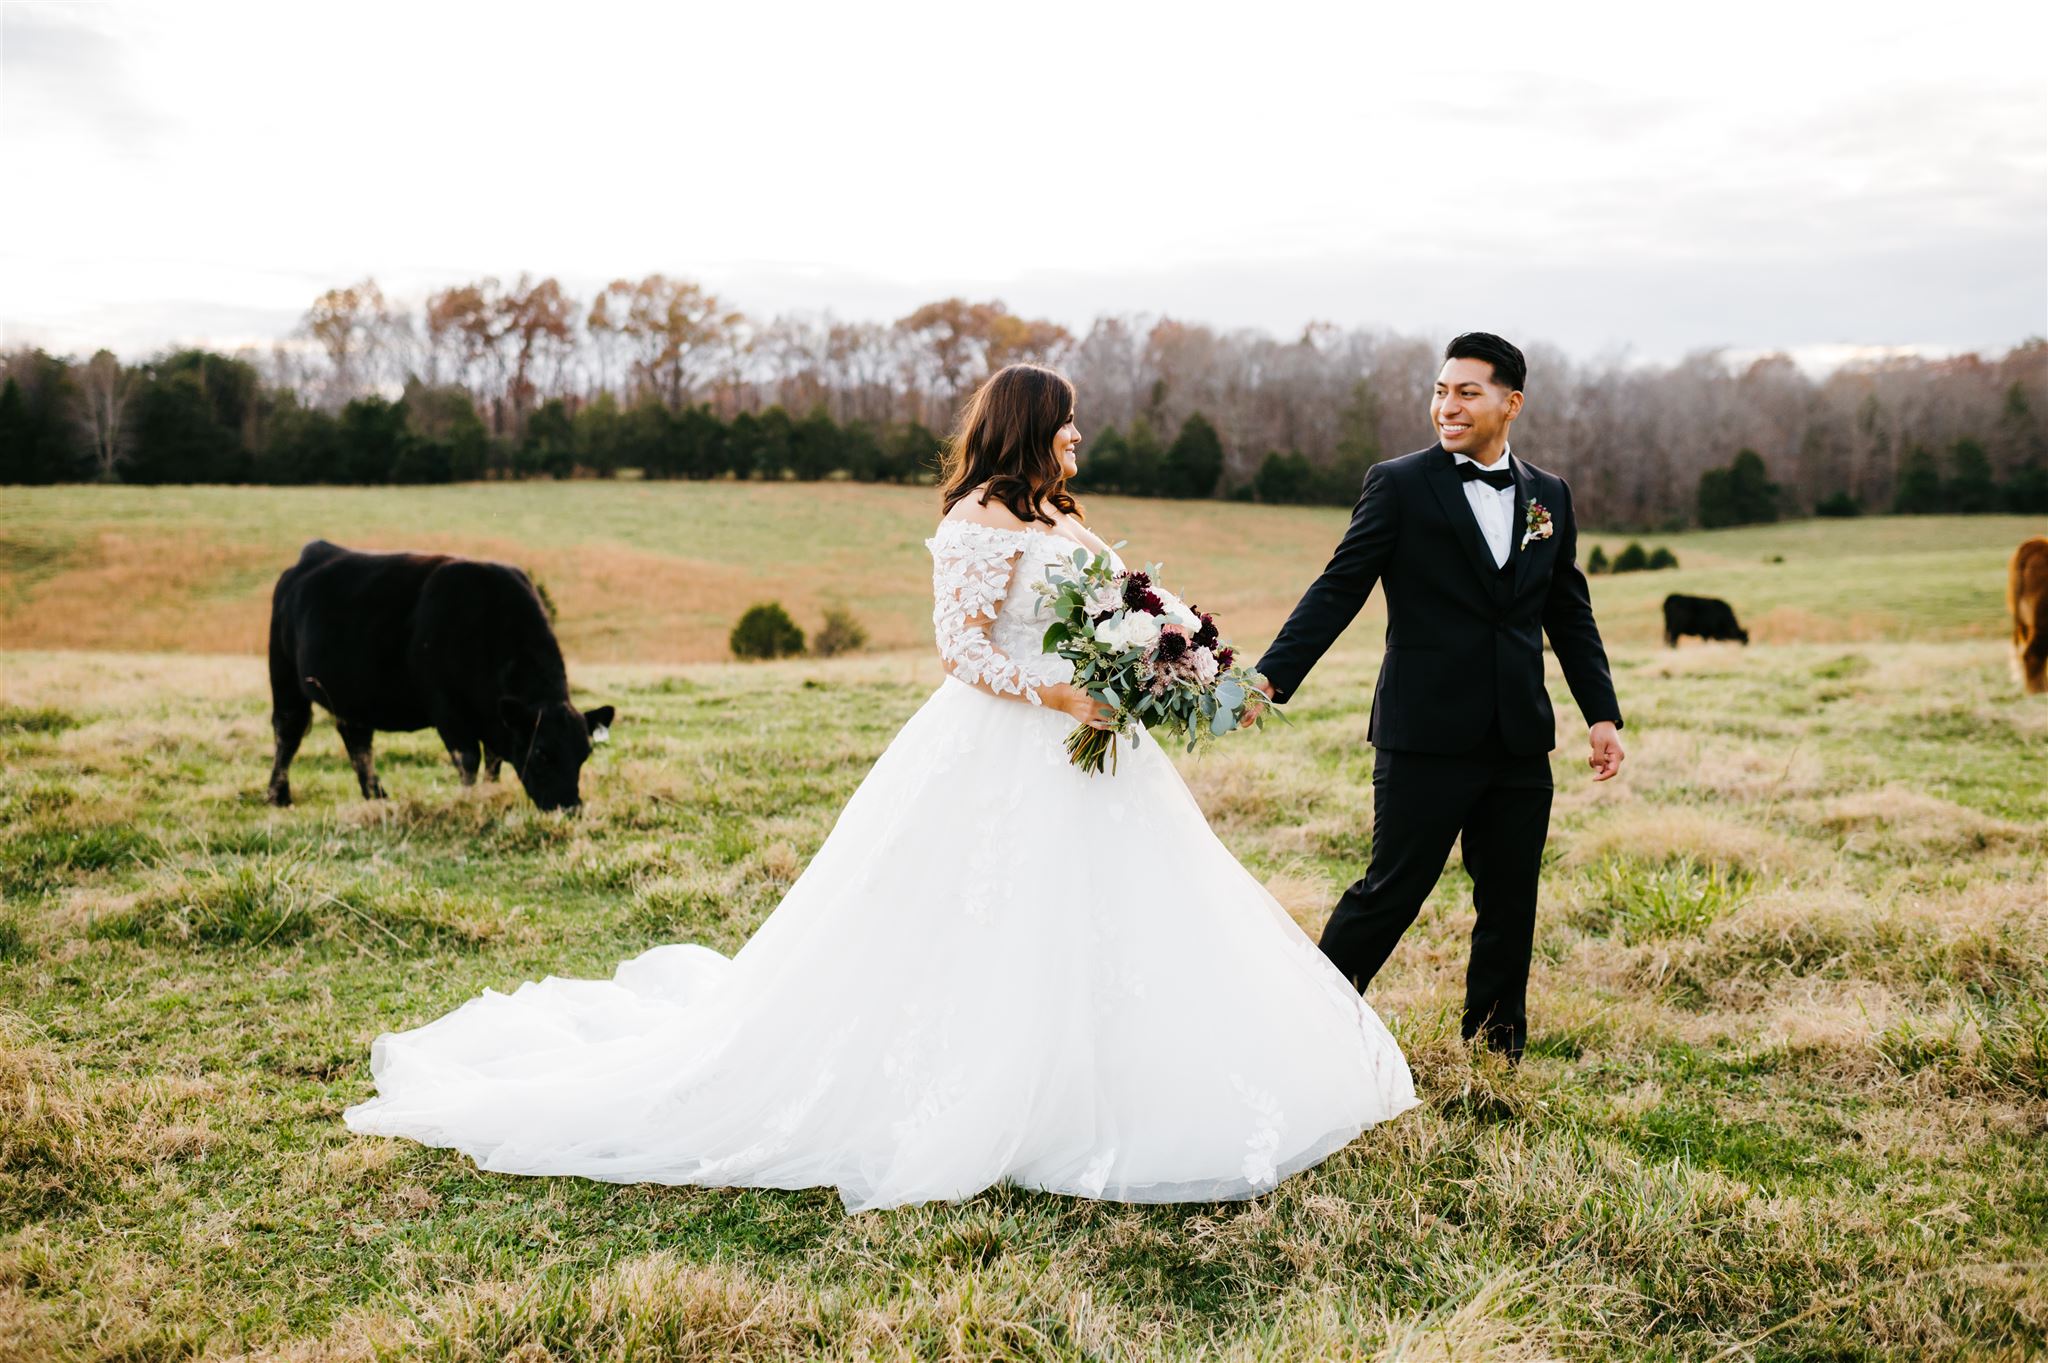 Shenandoah wedding at farm wedding venue with bride and groom holding hands as the groom leads them through a field full of black cows captured by Charlottesville wedding photographer